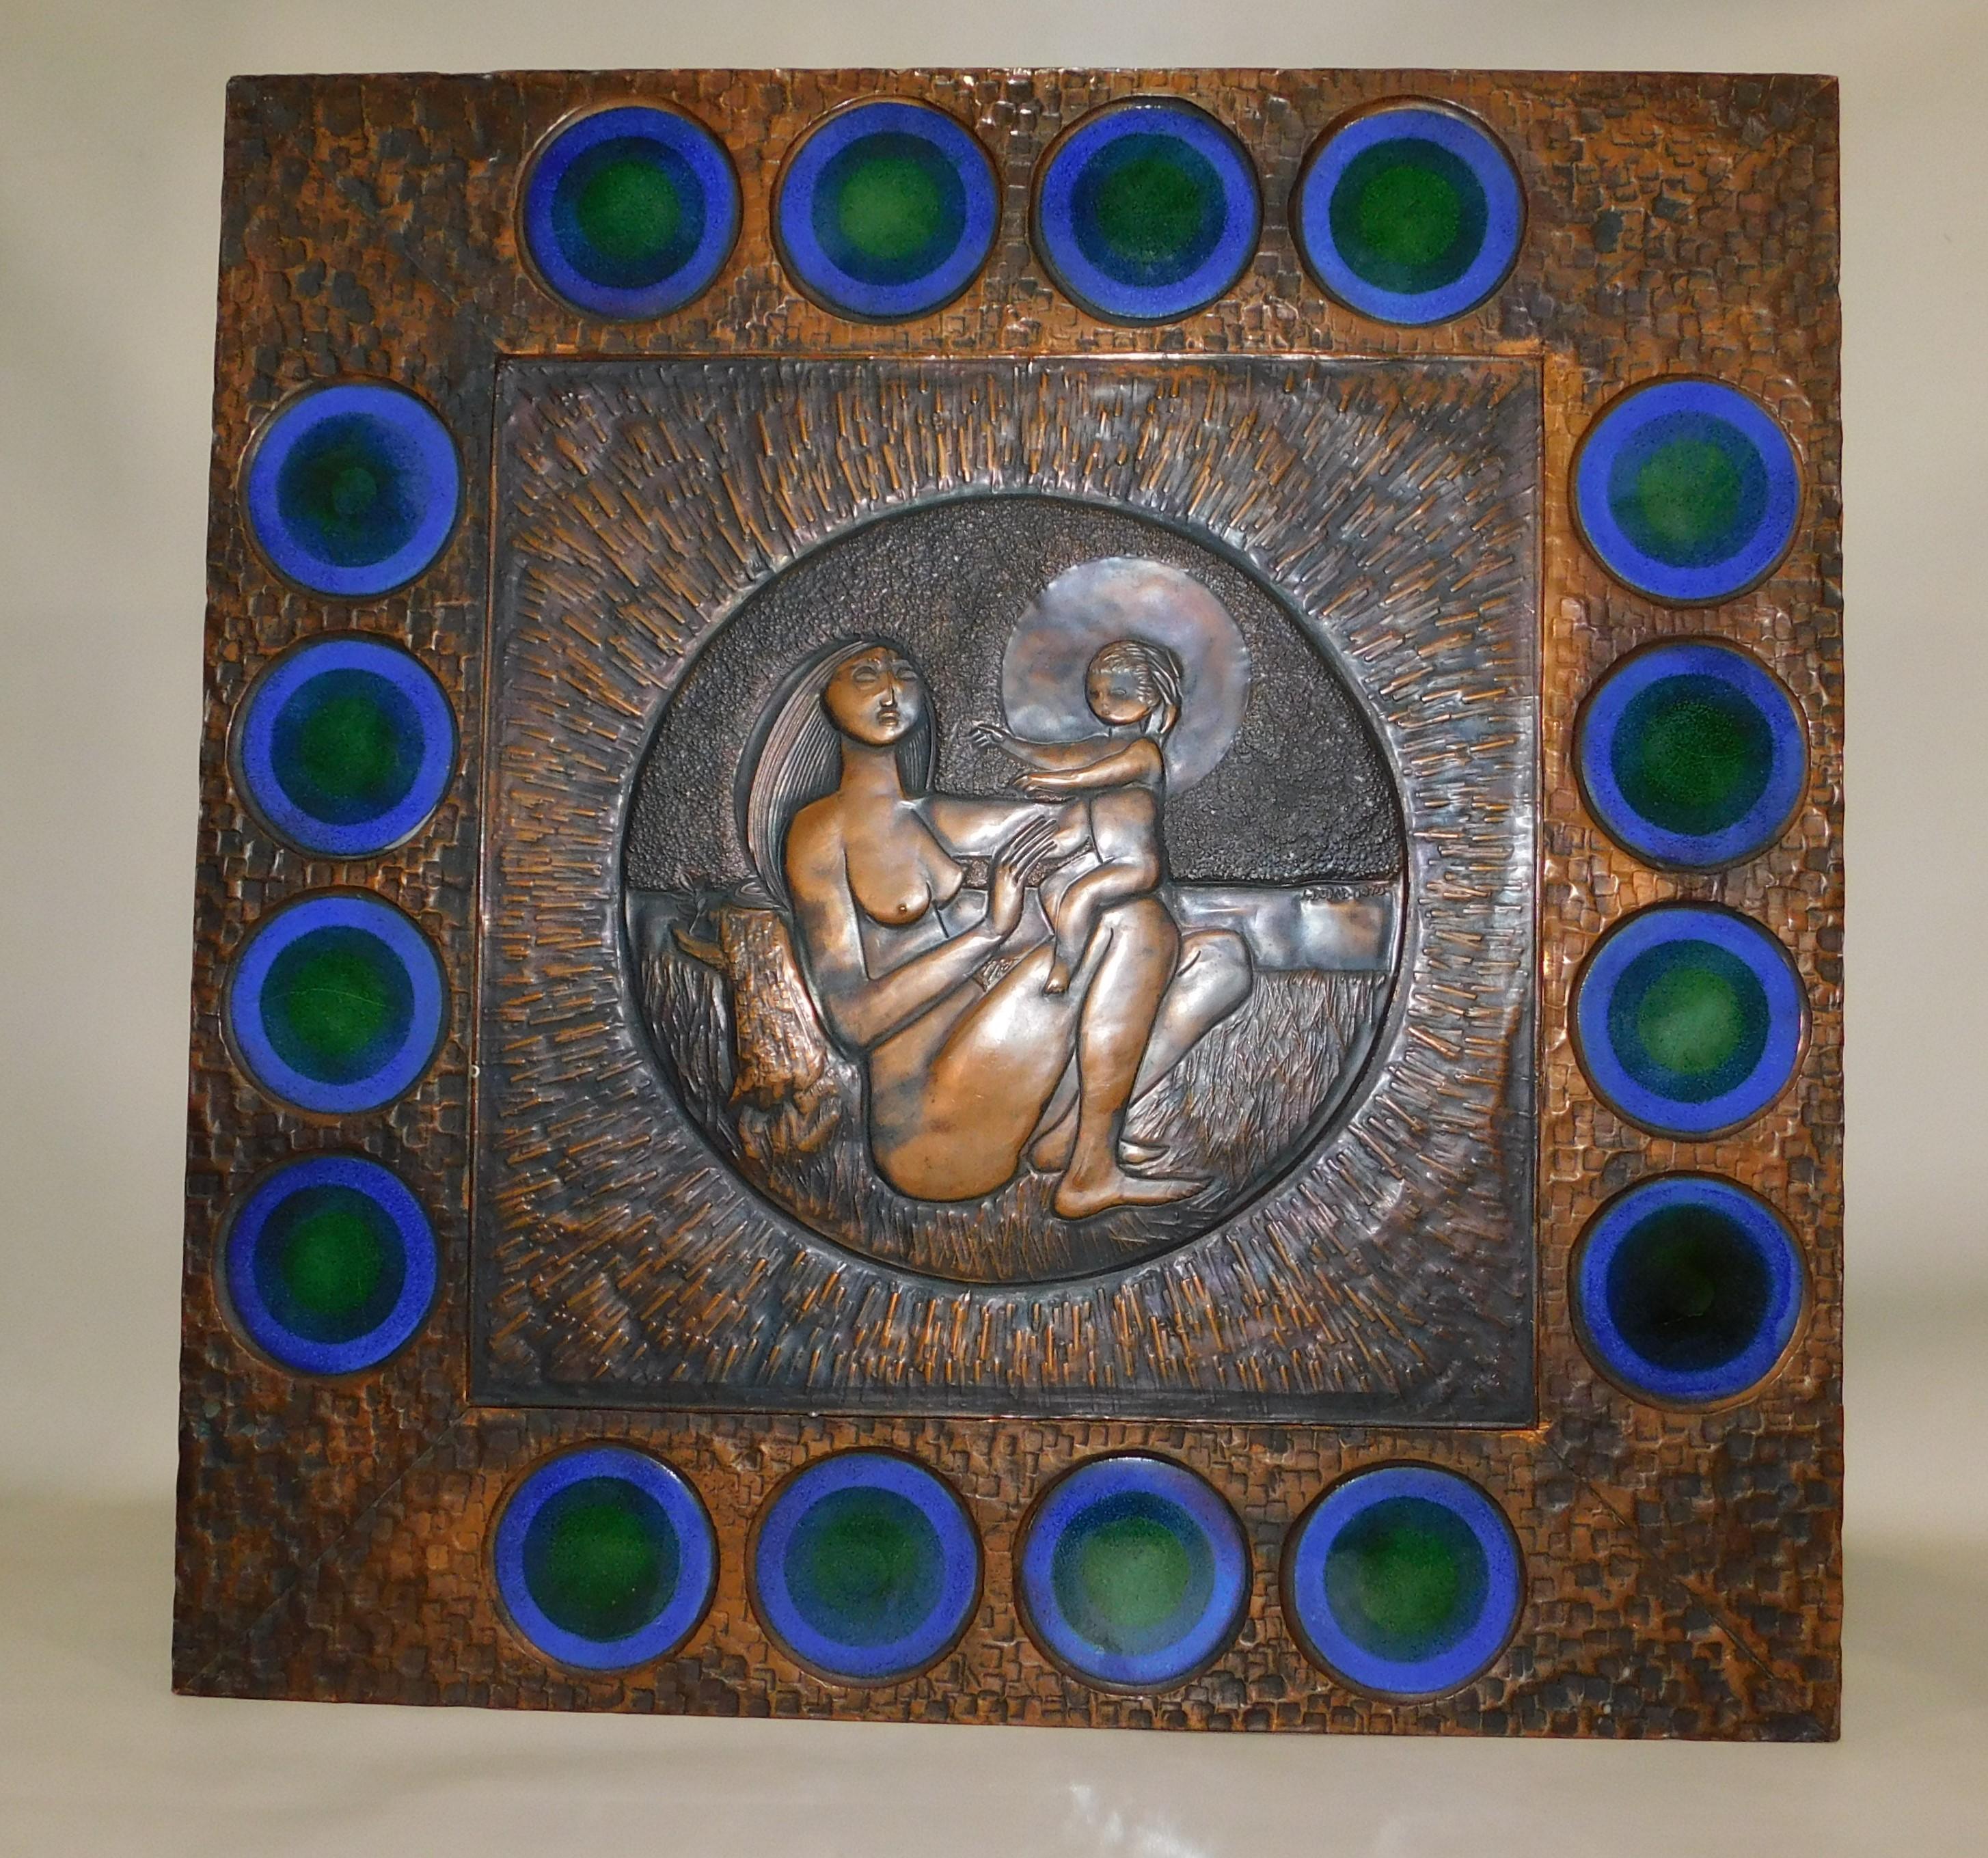 Copper Muralist Laszlo Buday Hand-Hammered Art Work Wall Decoration Panel, 1970 For Sale 4